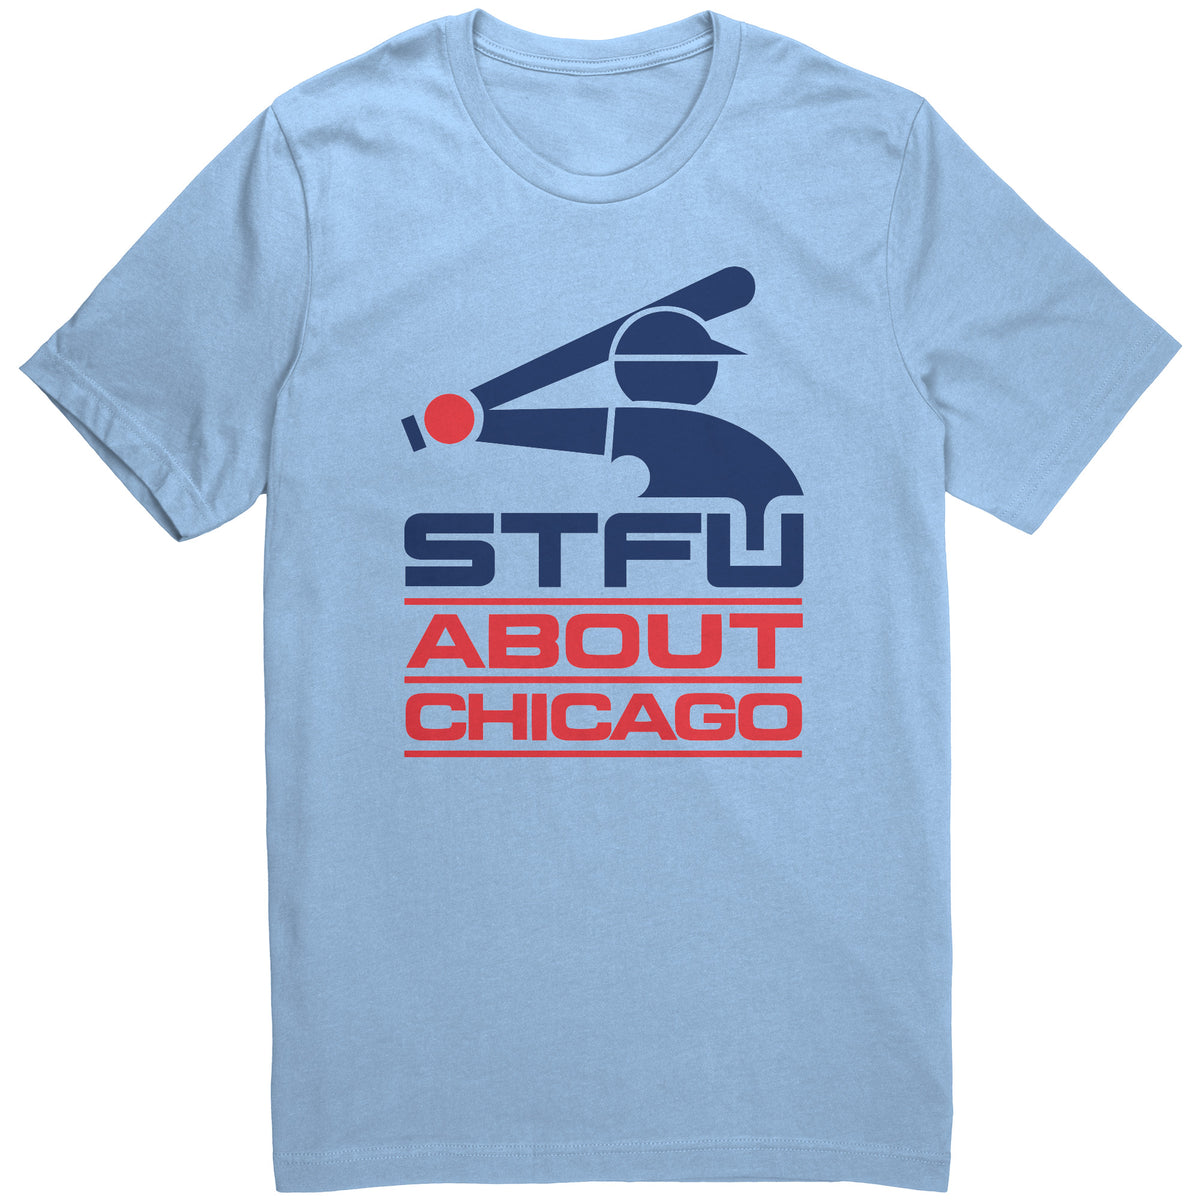 Chicago-Style Is Party Cut short sleeve shirt